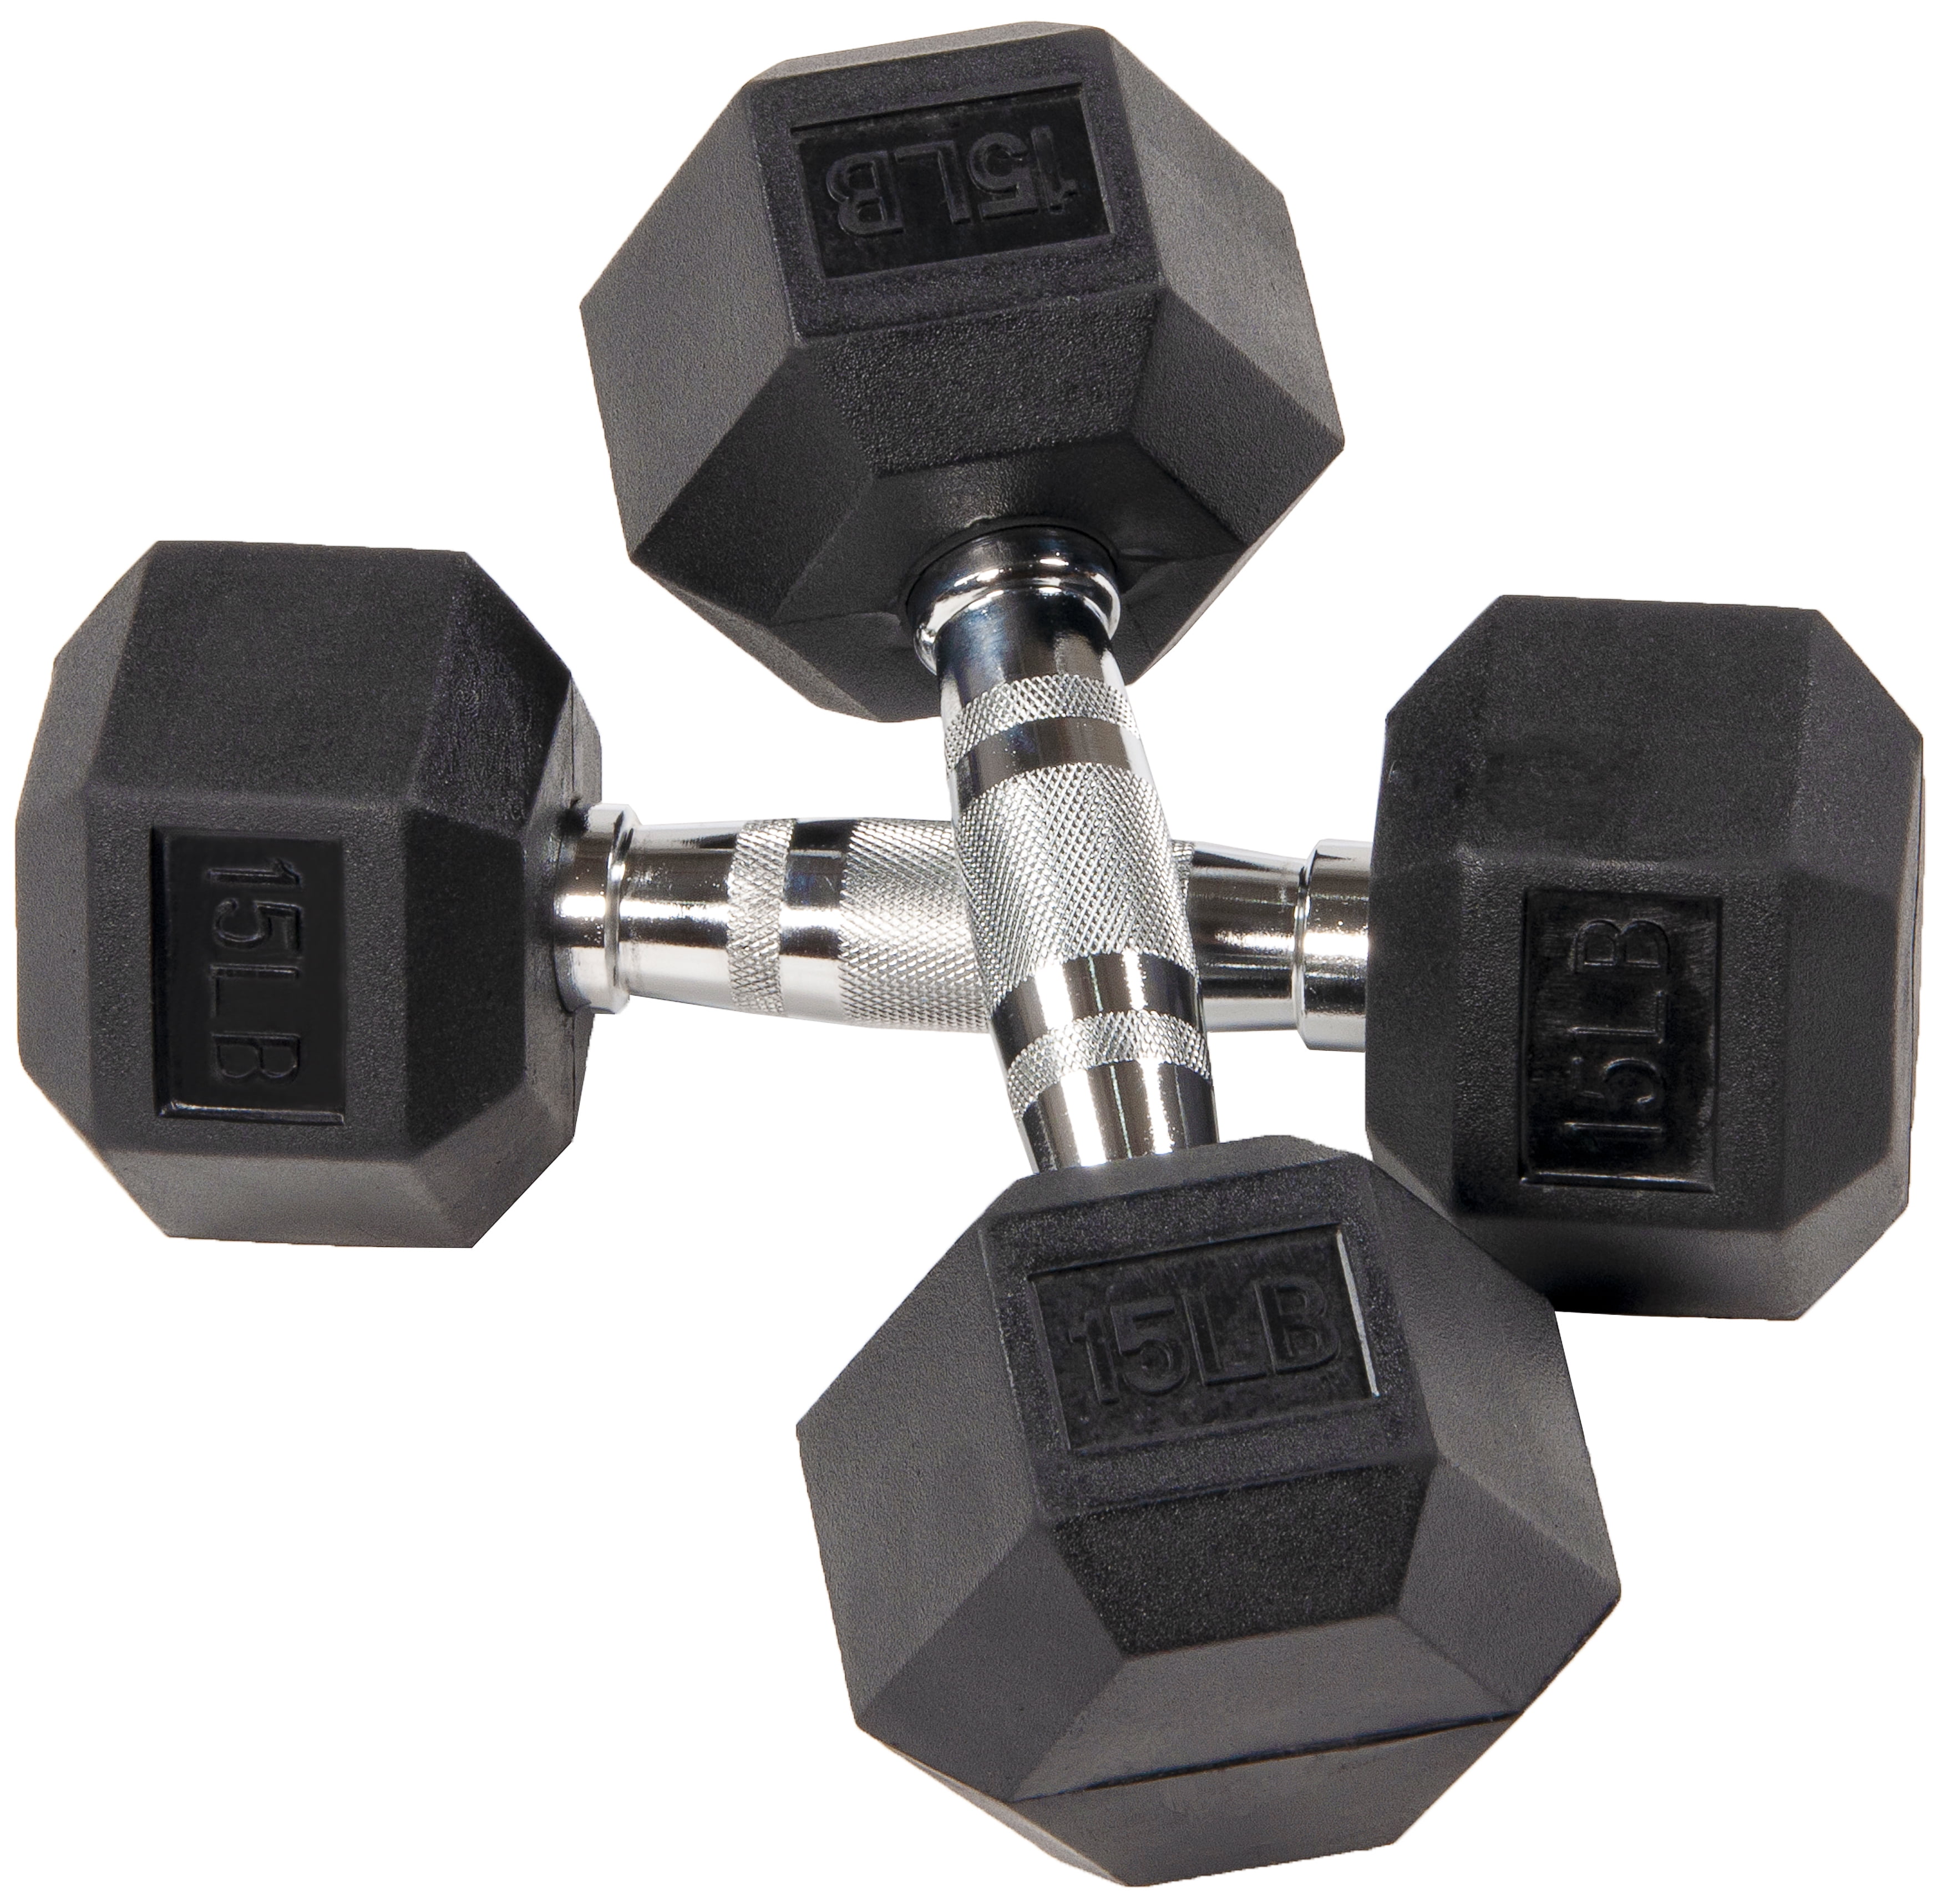 FAST FREE SHIPPING CAP Rubber Hex Dumbbell Set Pair of Two 25 lb Pound Weights 